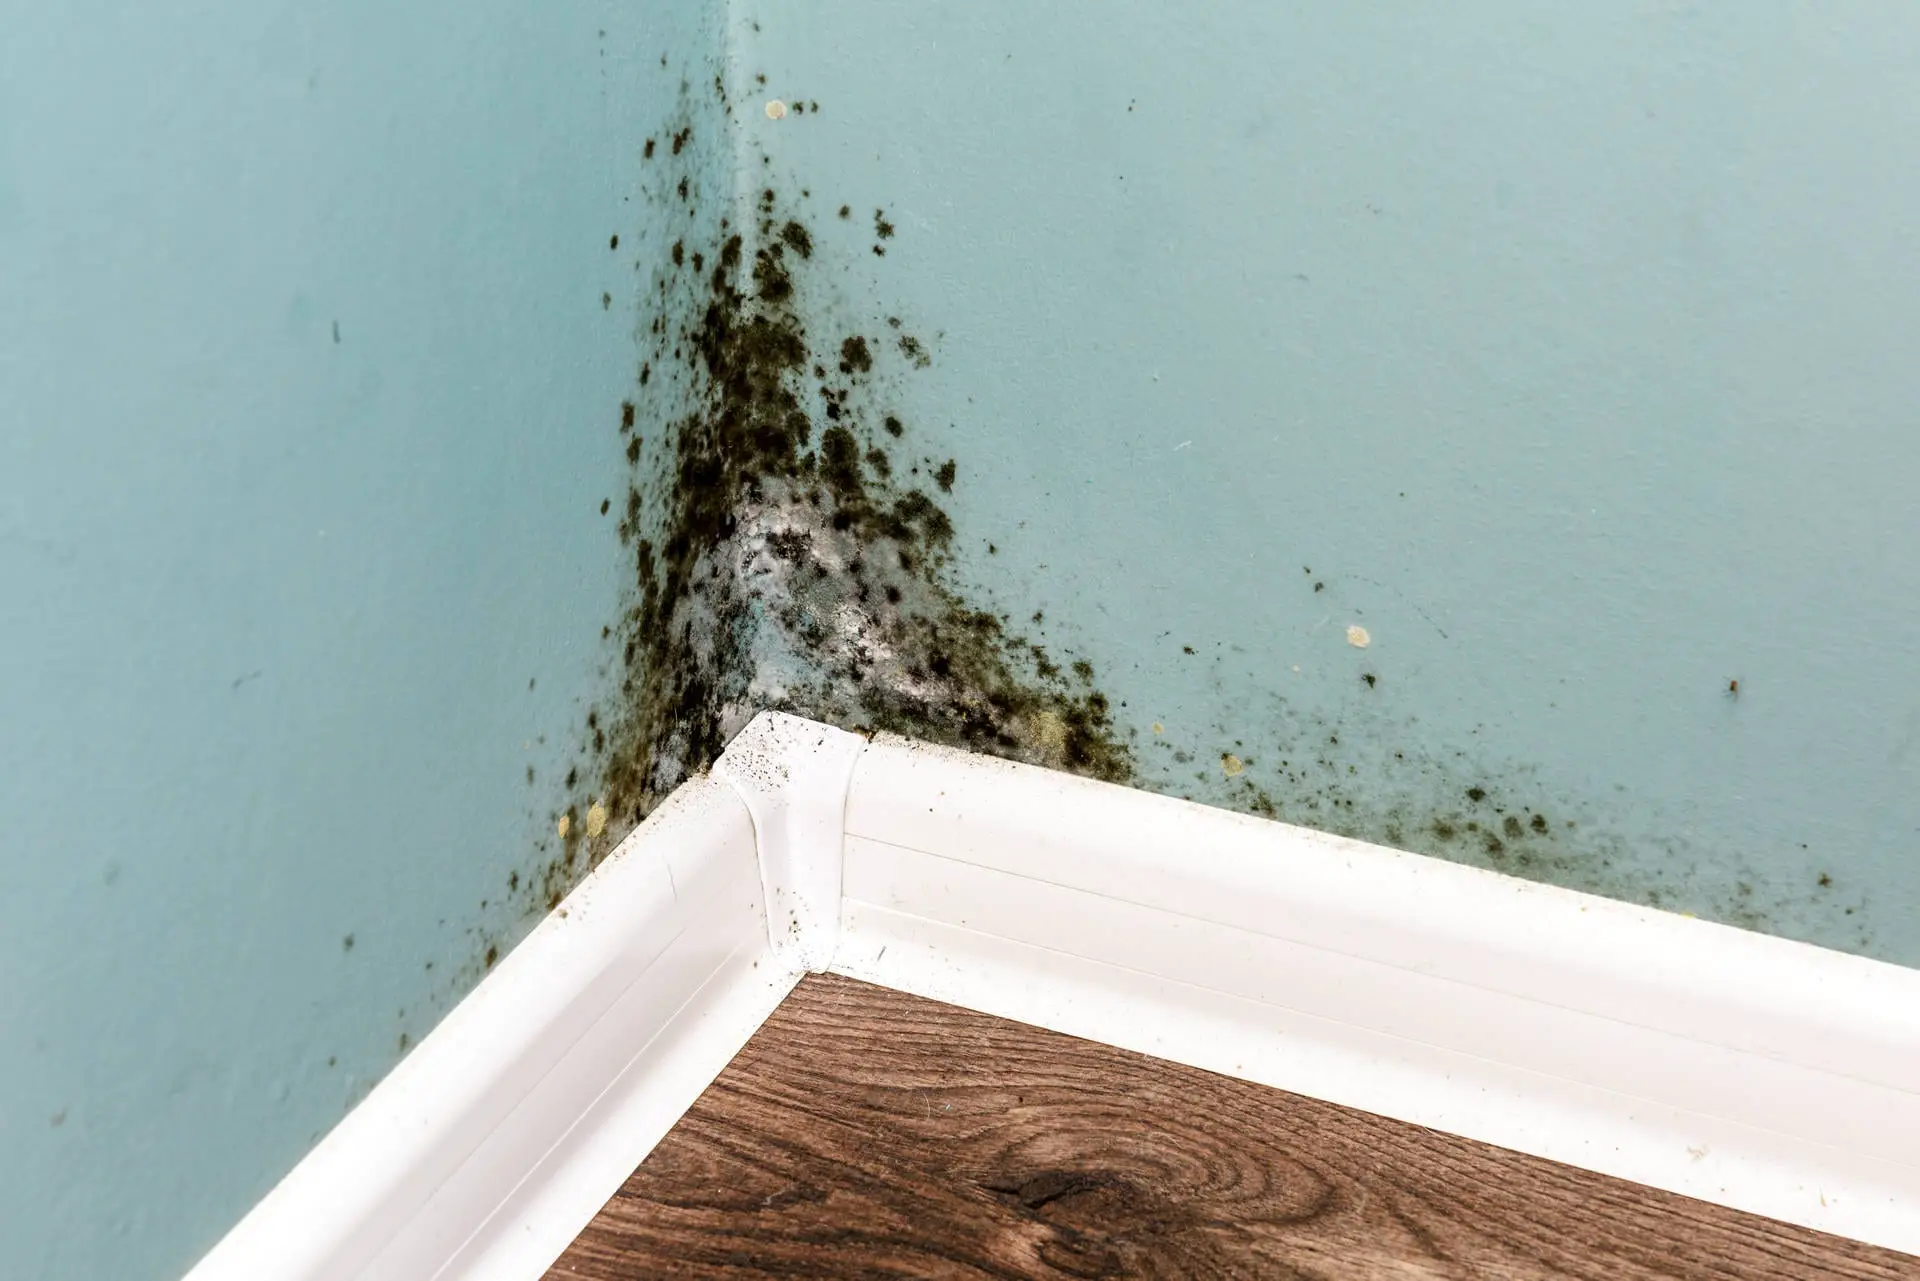 Black Mold vs Mildew: Whats The Difference?